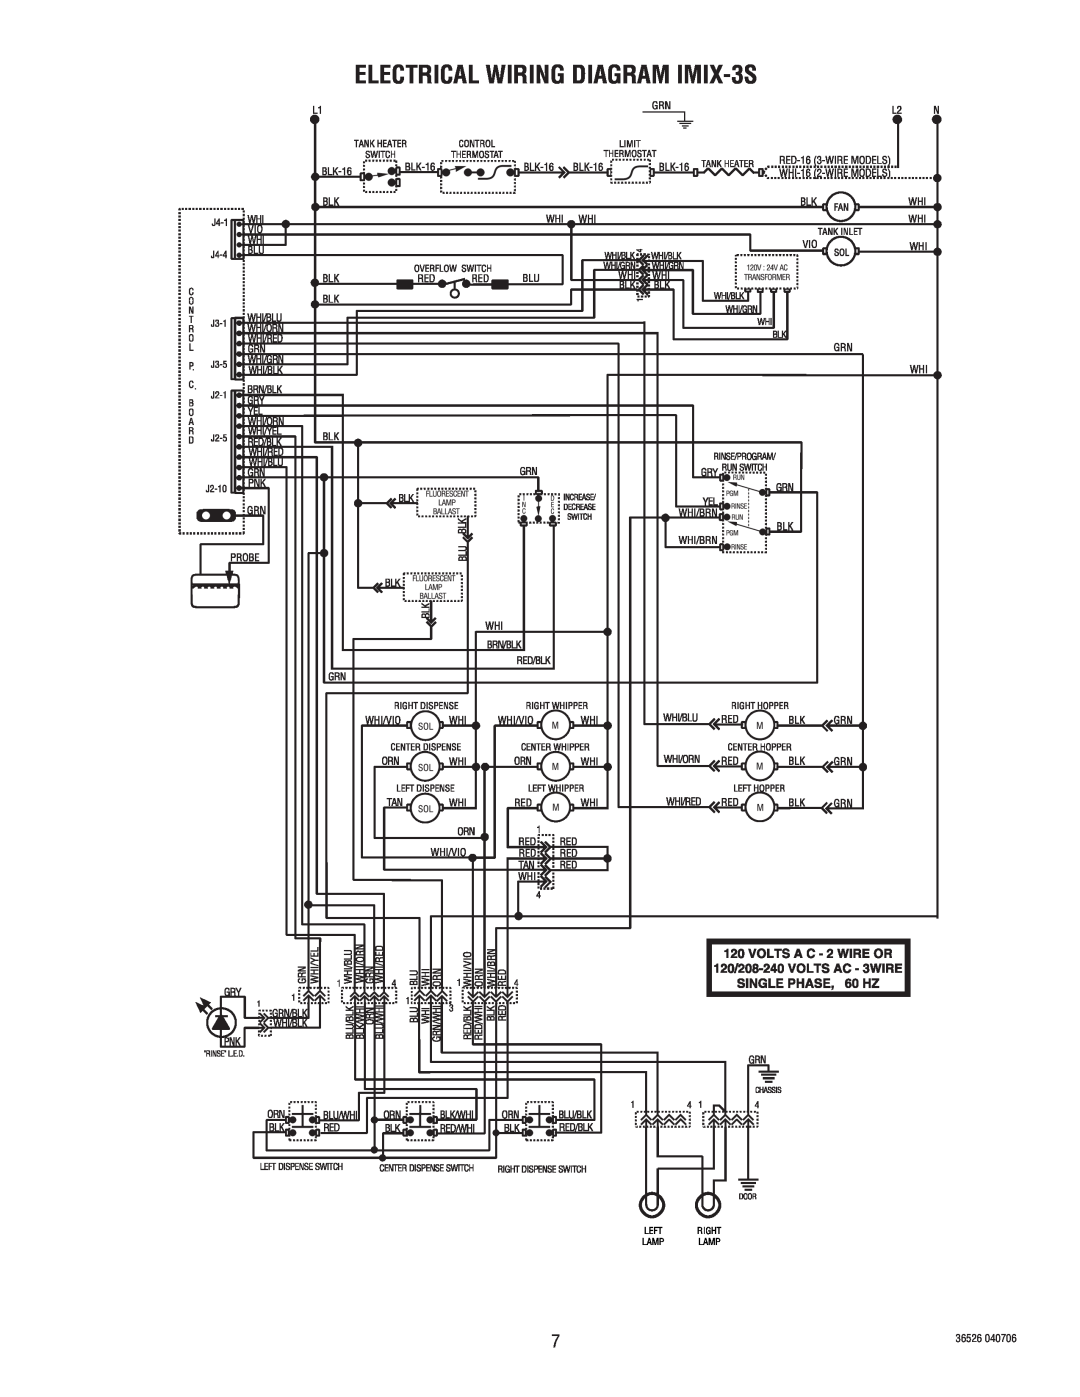 Bunn 5S manual ELECTRICAL WIRING DIAGRAM IMIX-3S, 36526, Lamp, Left, Right 